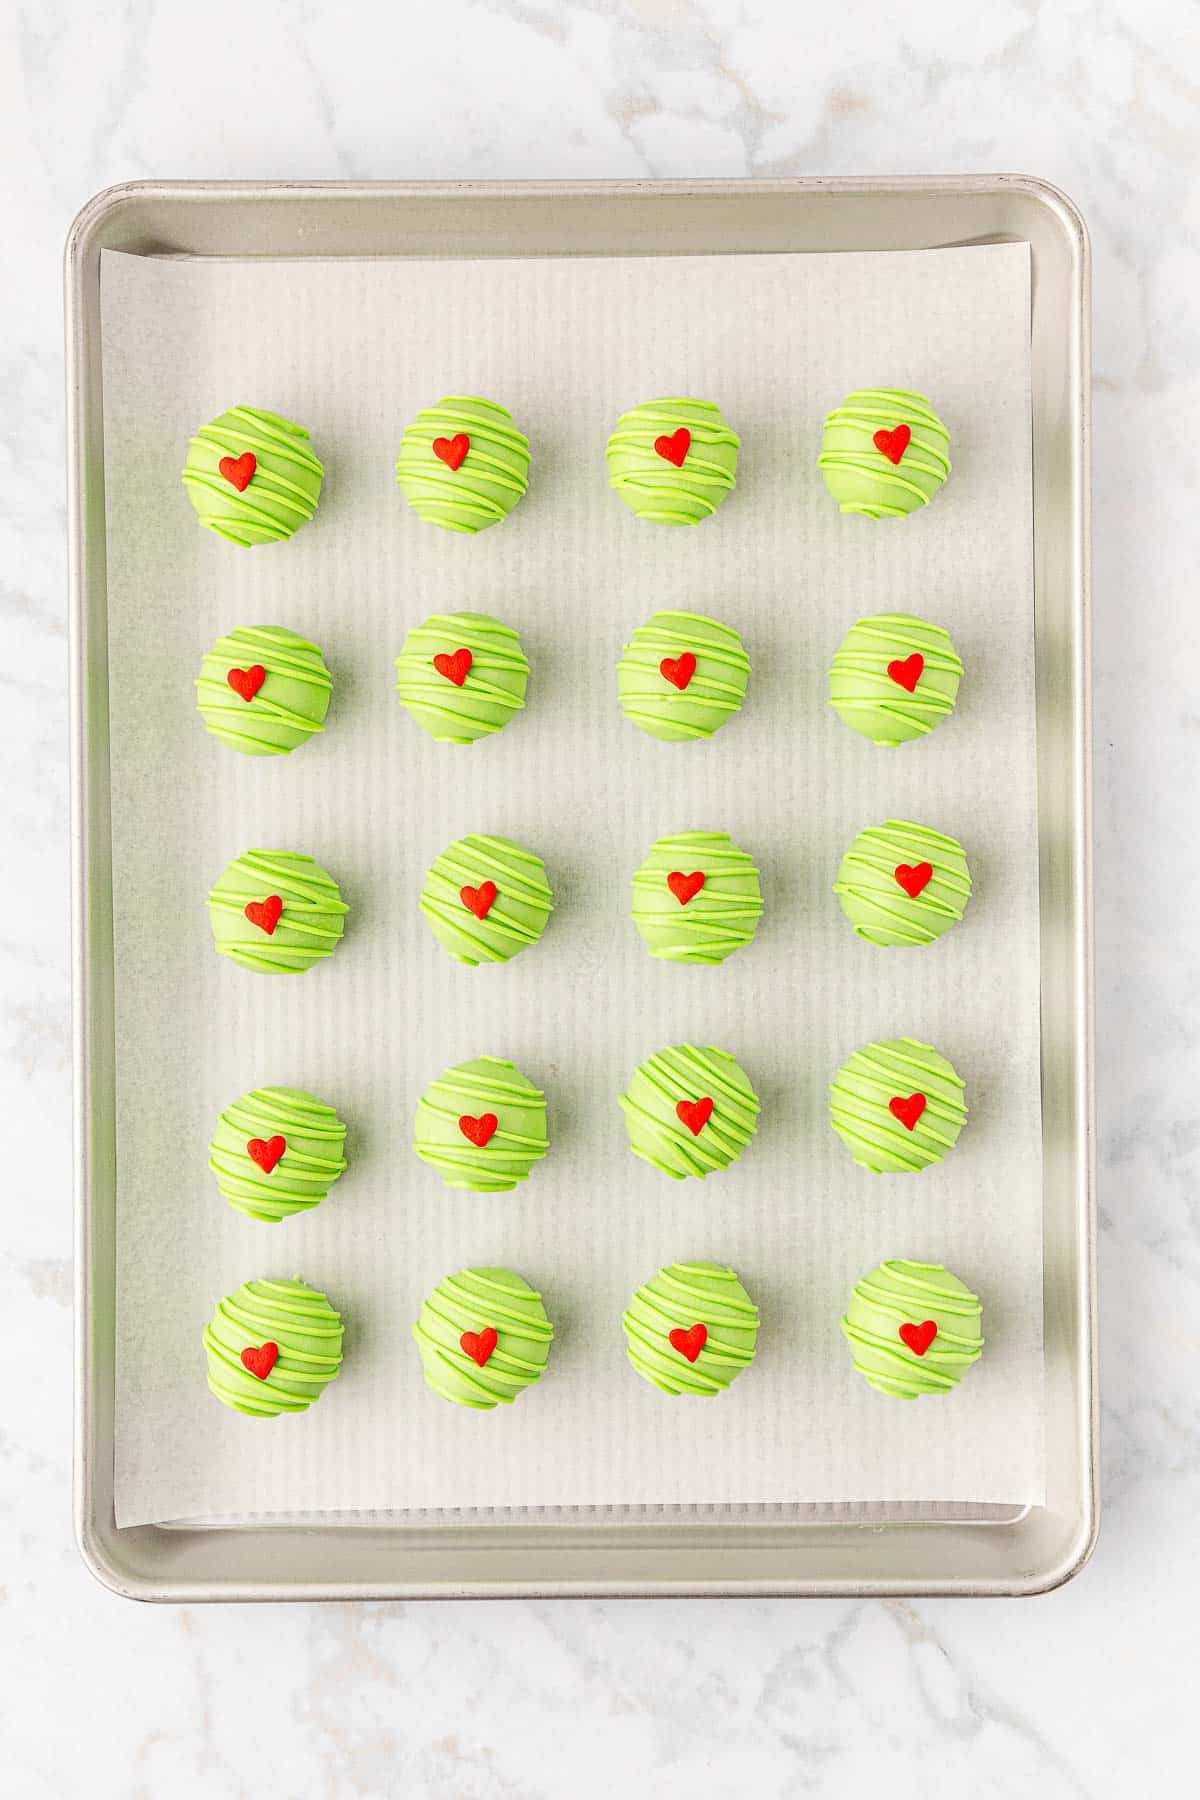 Green candy coated oreo balls with a red heart on each one on a baking sheet.